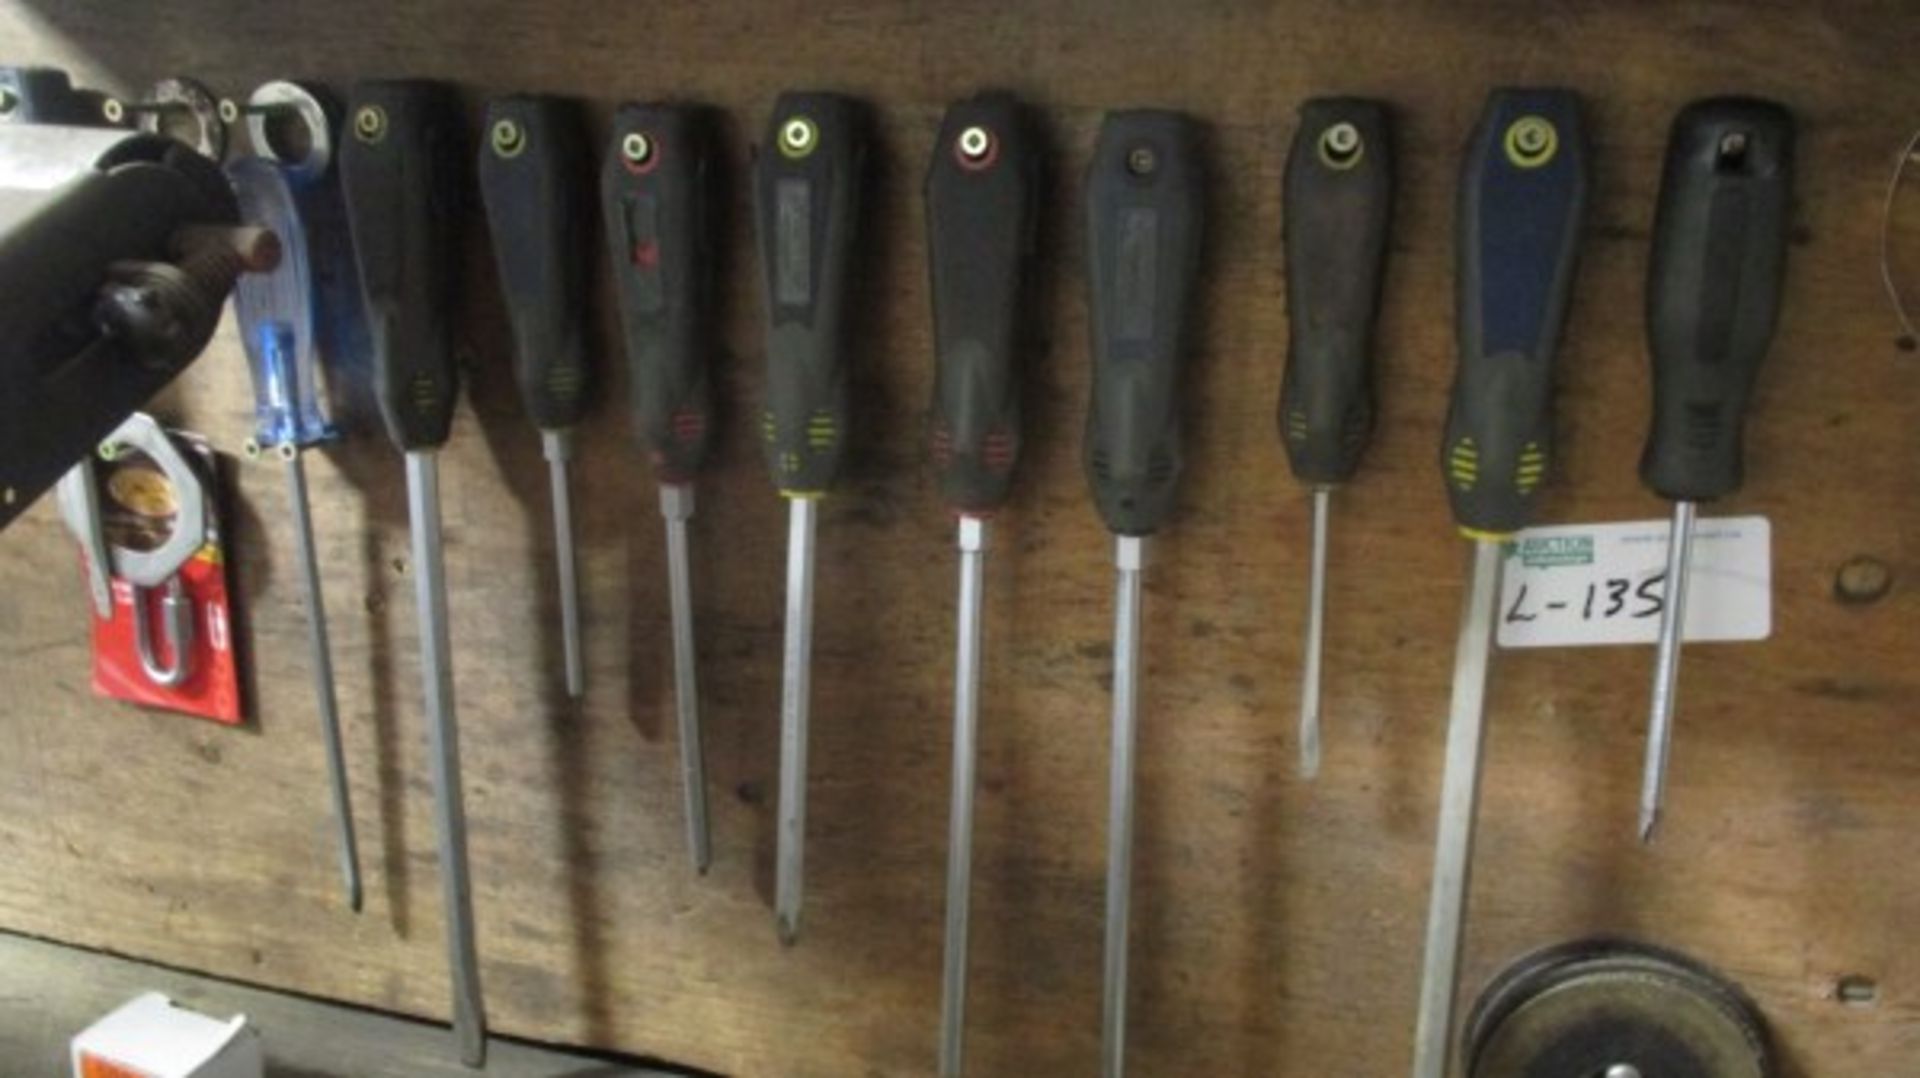 WALL HANGING LOT OF SCREWDRIVERS, WRENCHES, 2' SQUARE, VICE GRIPS ETC